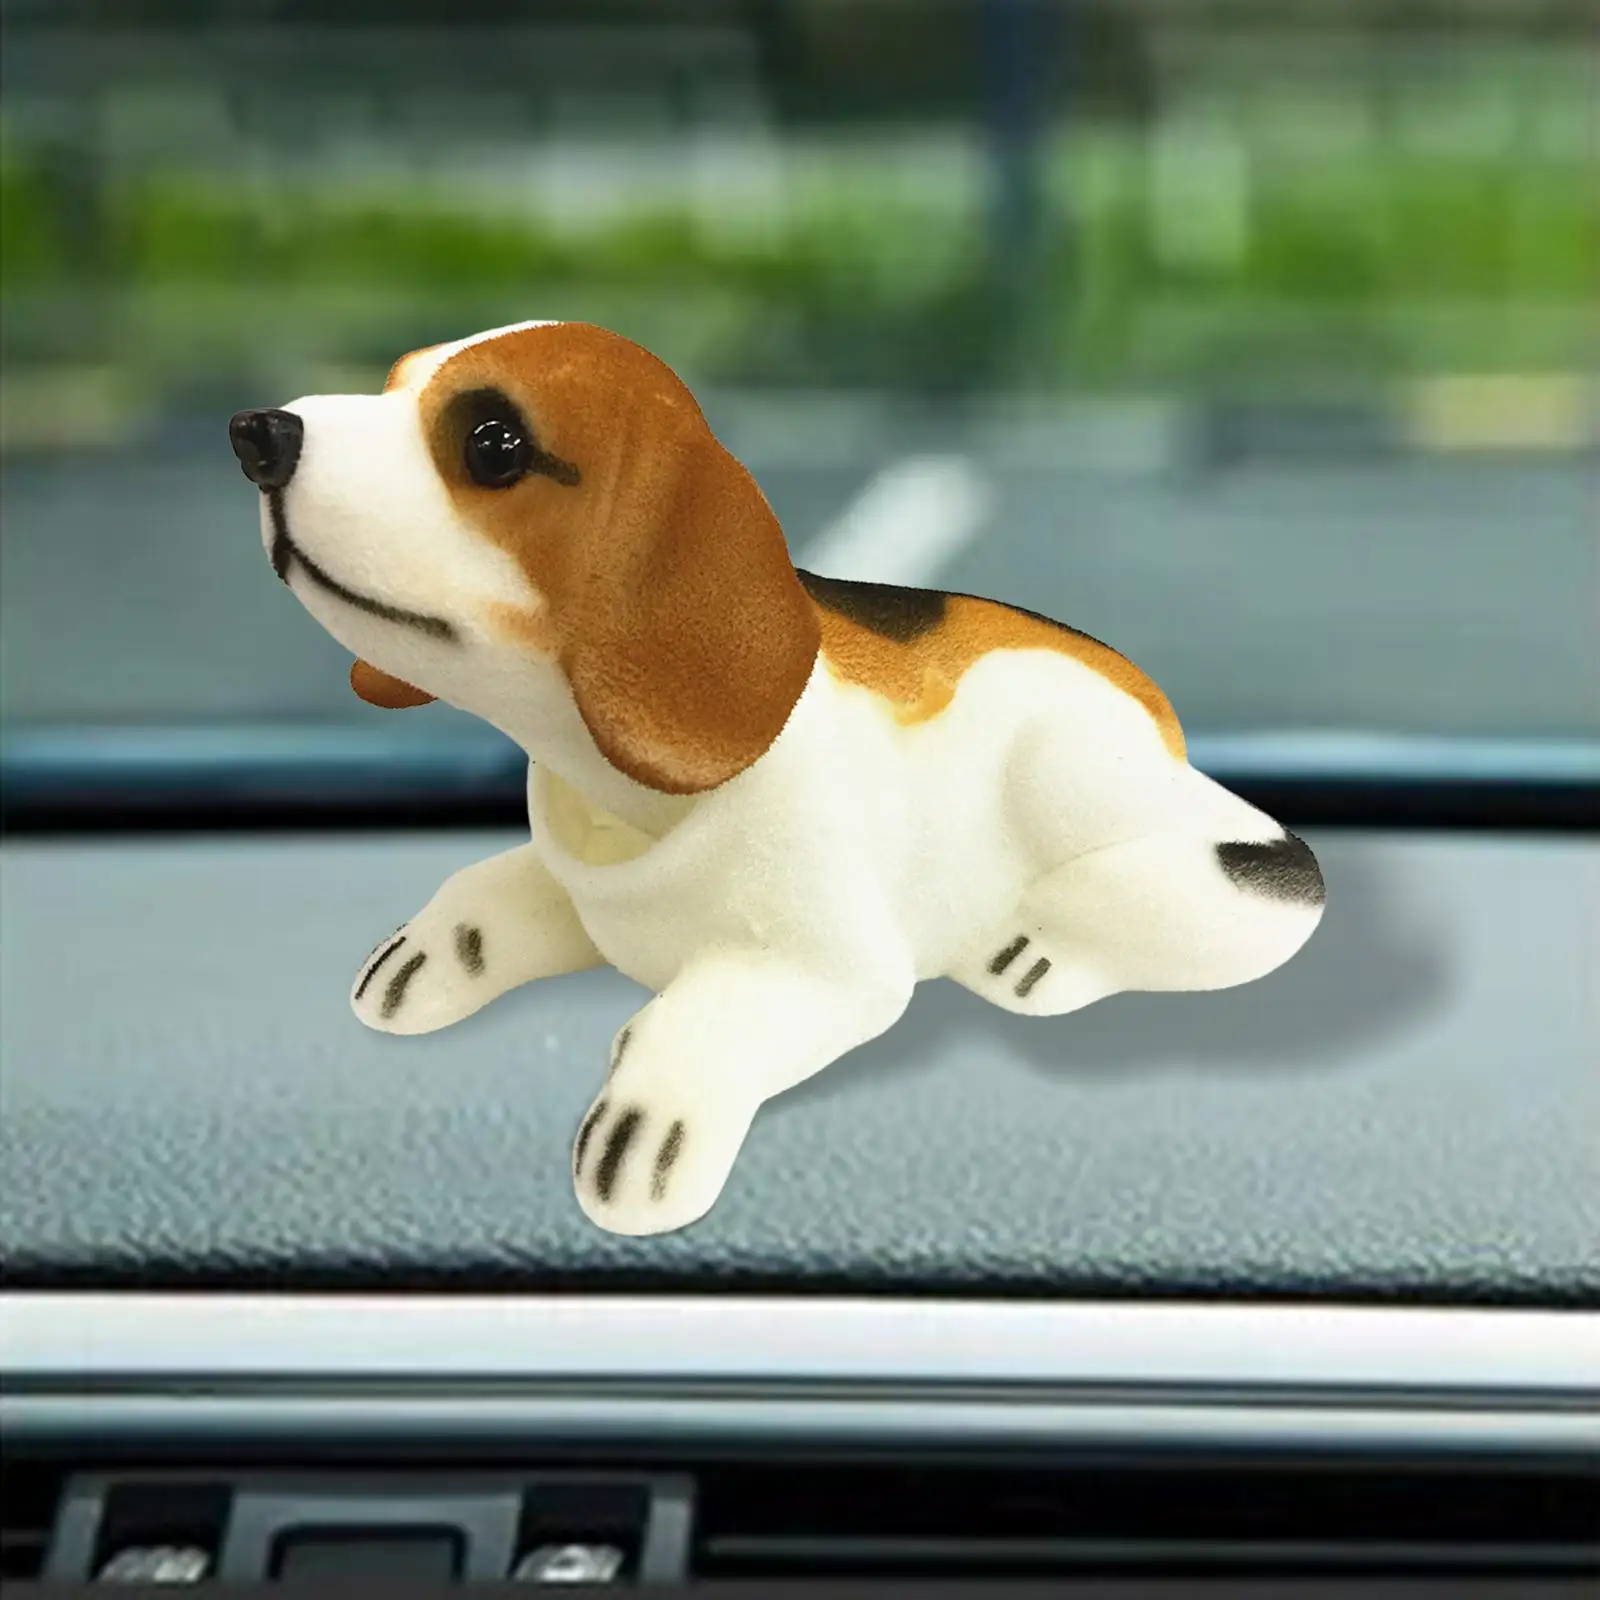 Cute Shaking Head Dog Car Vehicle Decoration Gifts Desk Tabletop Office Decor Car Puppy